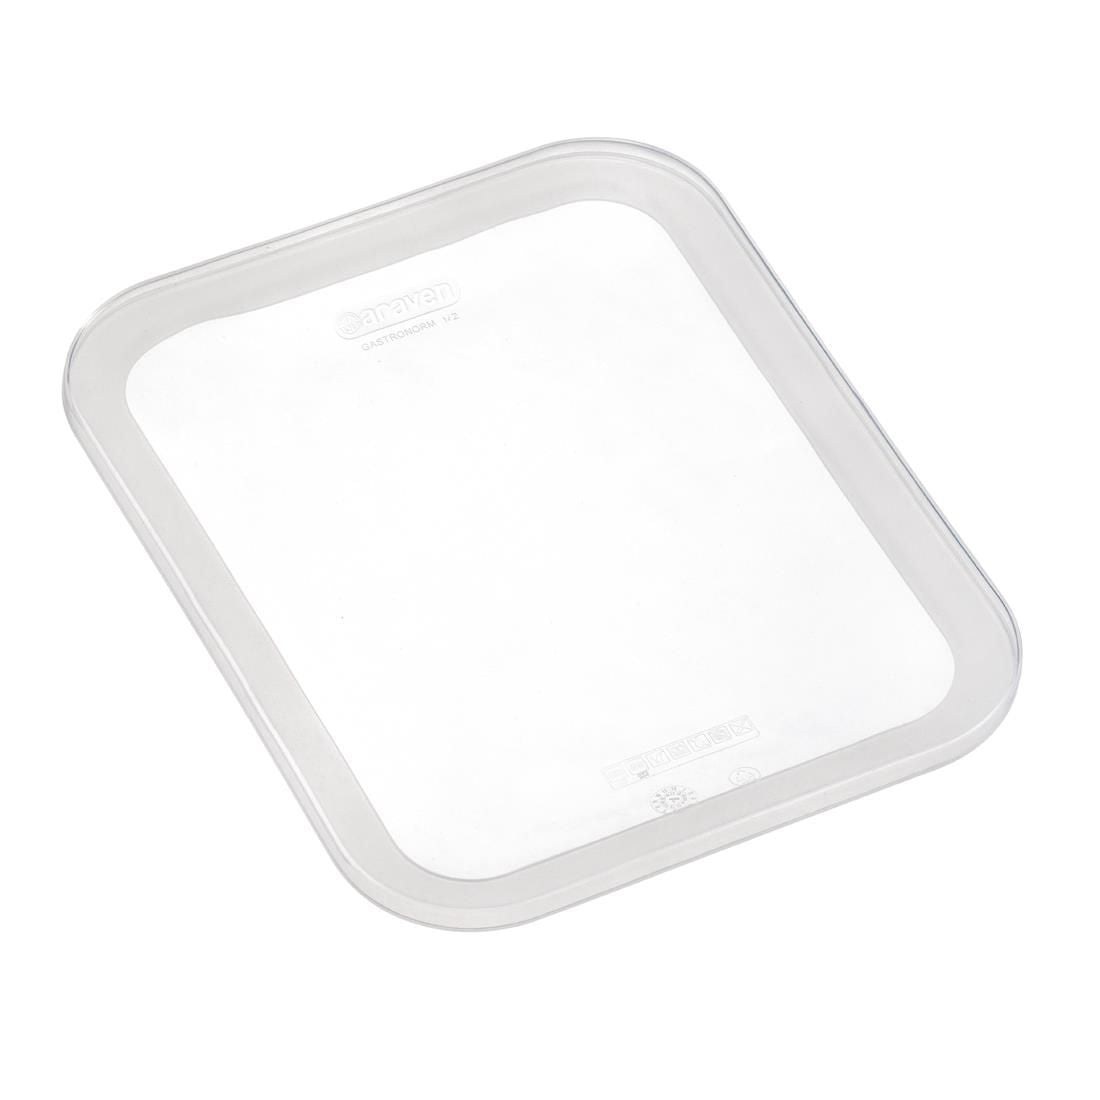 GG801 Araven Silicone 1/2 Gastronorm Lid JD Catering Equipment Solutions Ltd